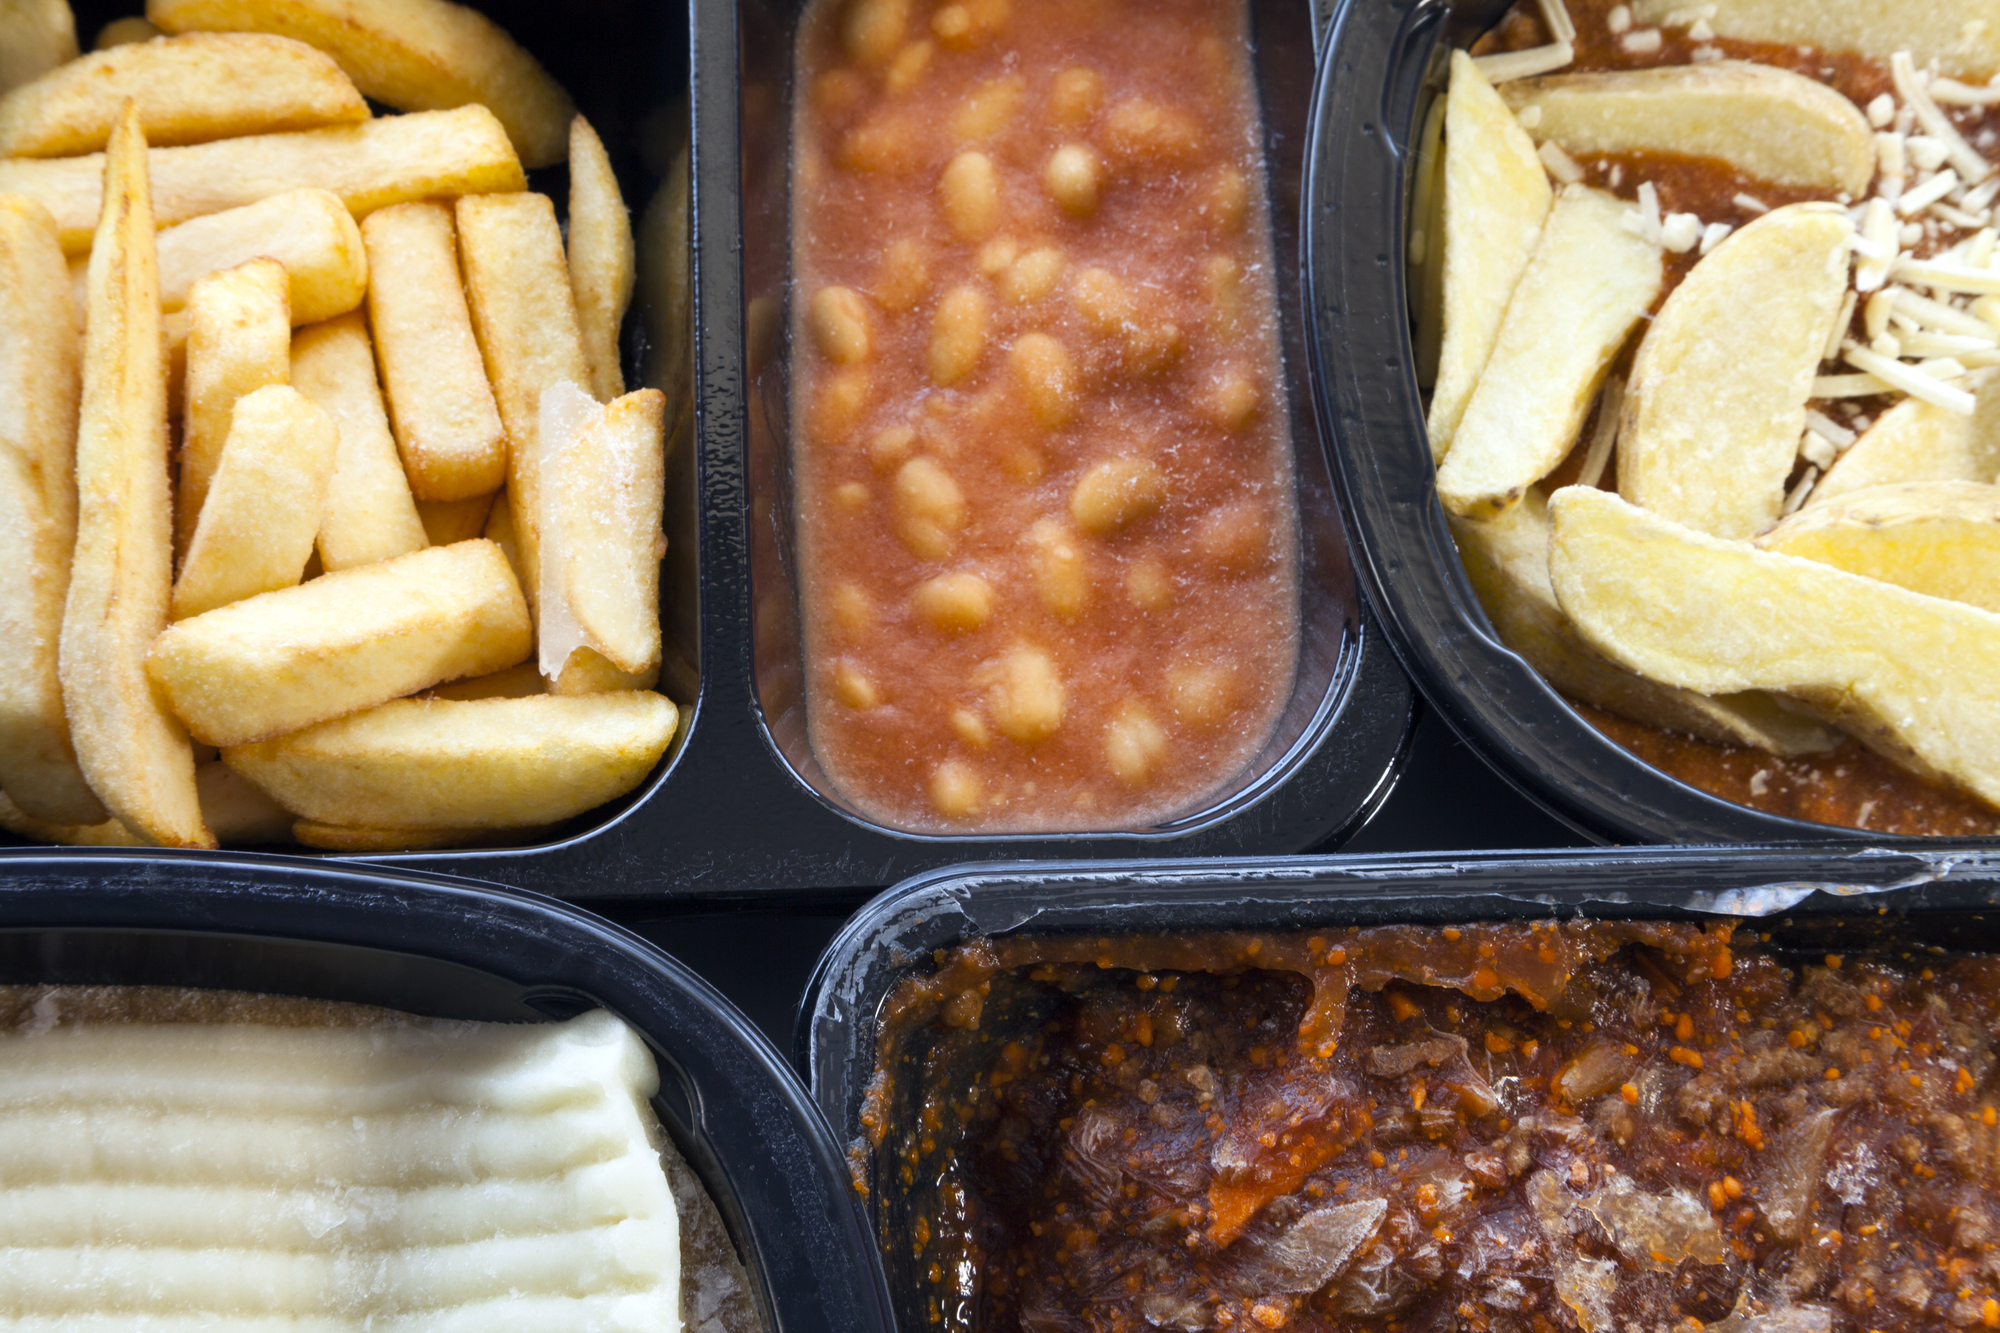 Selection of frozen, processed, ready made foods, consisting of potato chips, mince, lasagna in black, plastic containers . Microwave meals ready to heat up .